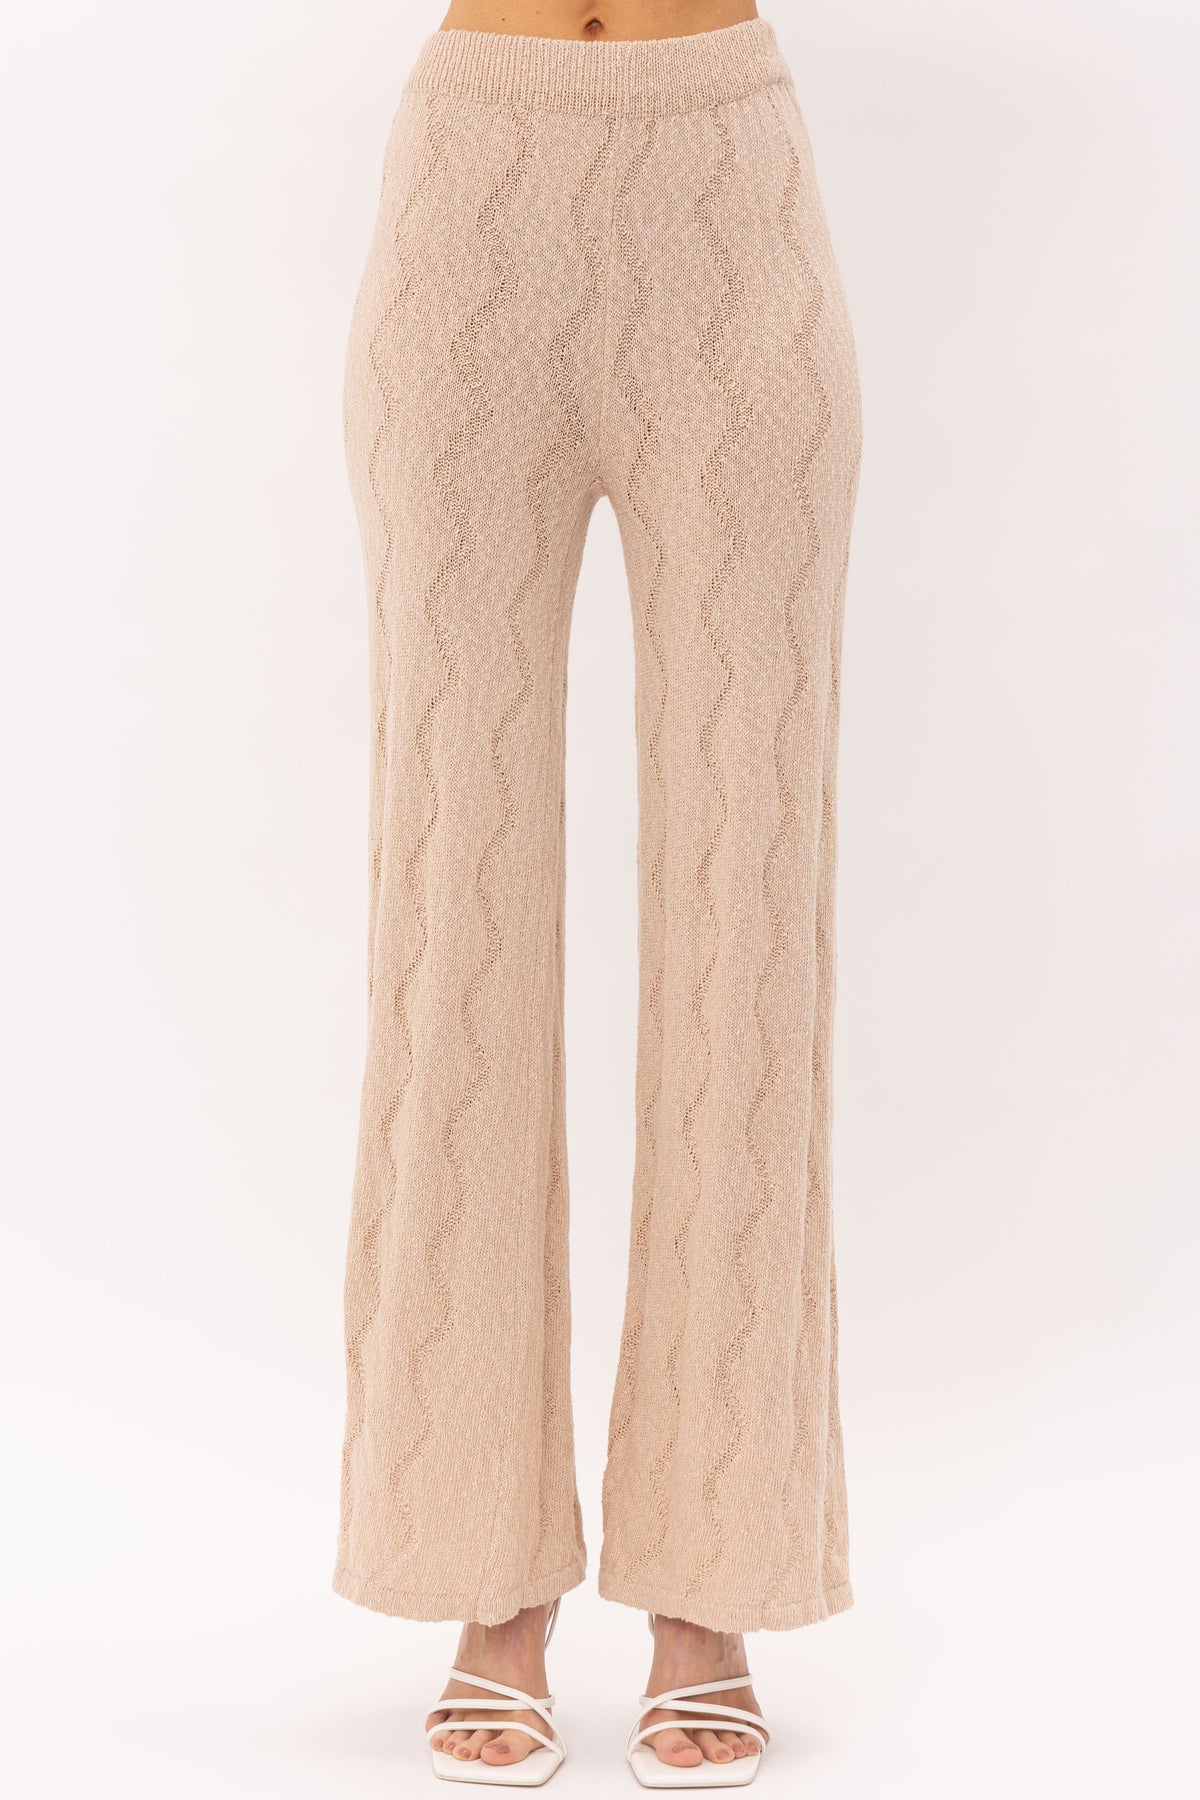 Willow Knit Pants